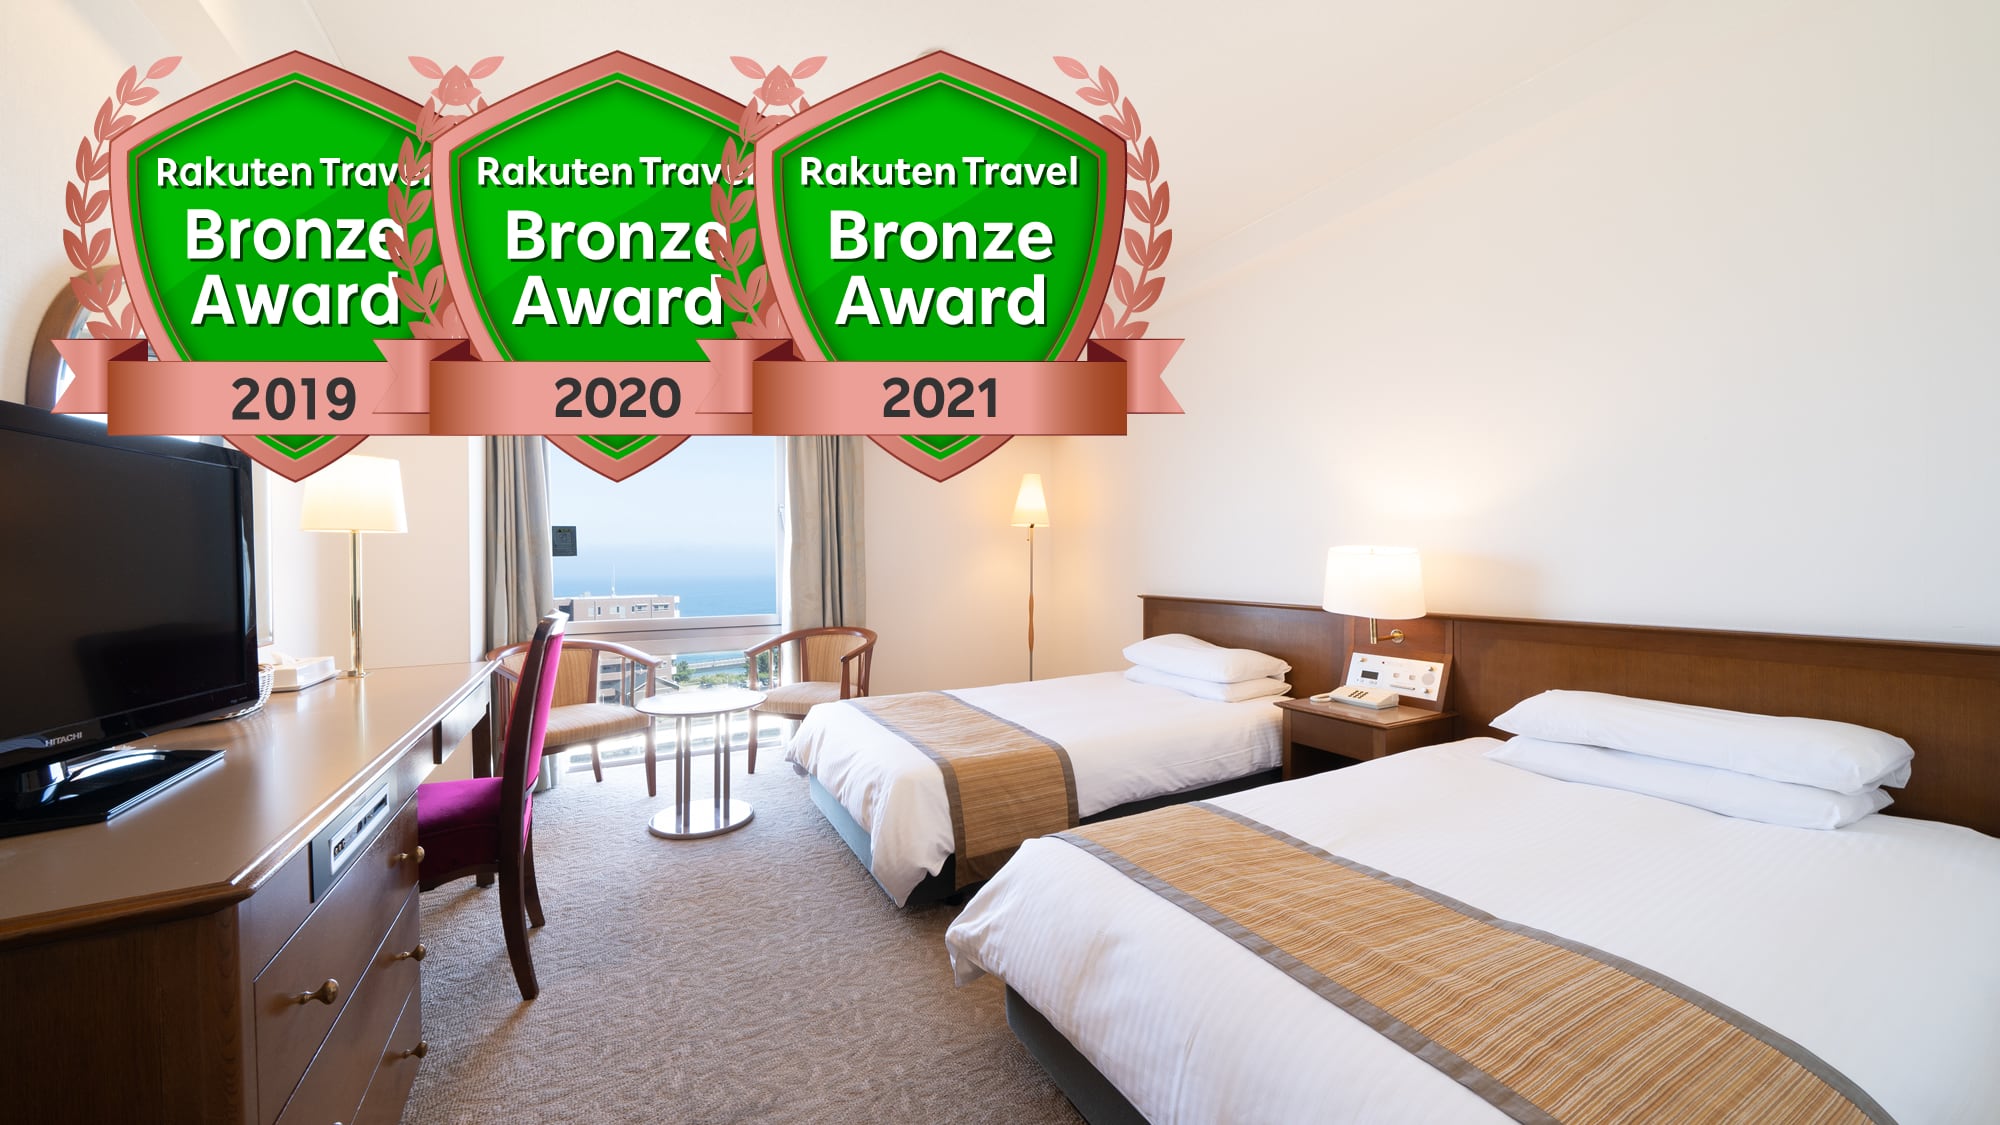 3 years in a row! Received Rakuten Award (Guest Room / Ocean View Twin)